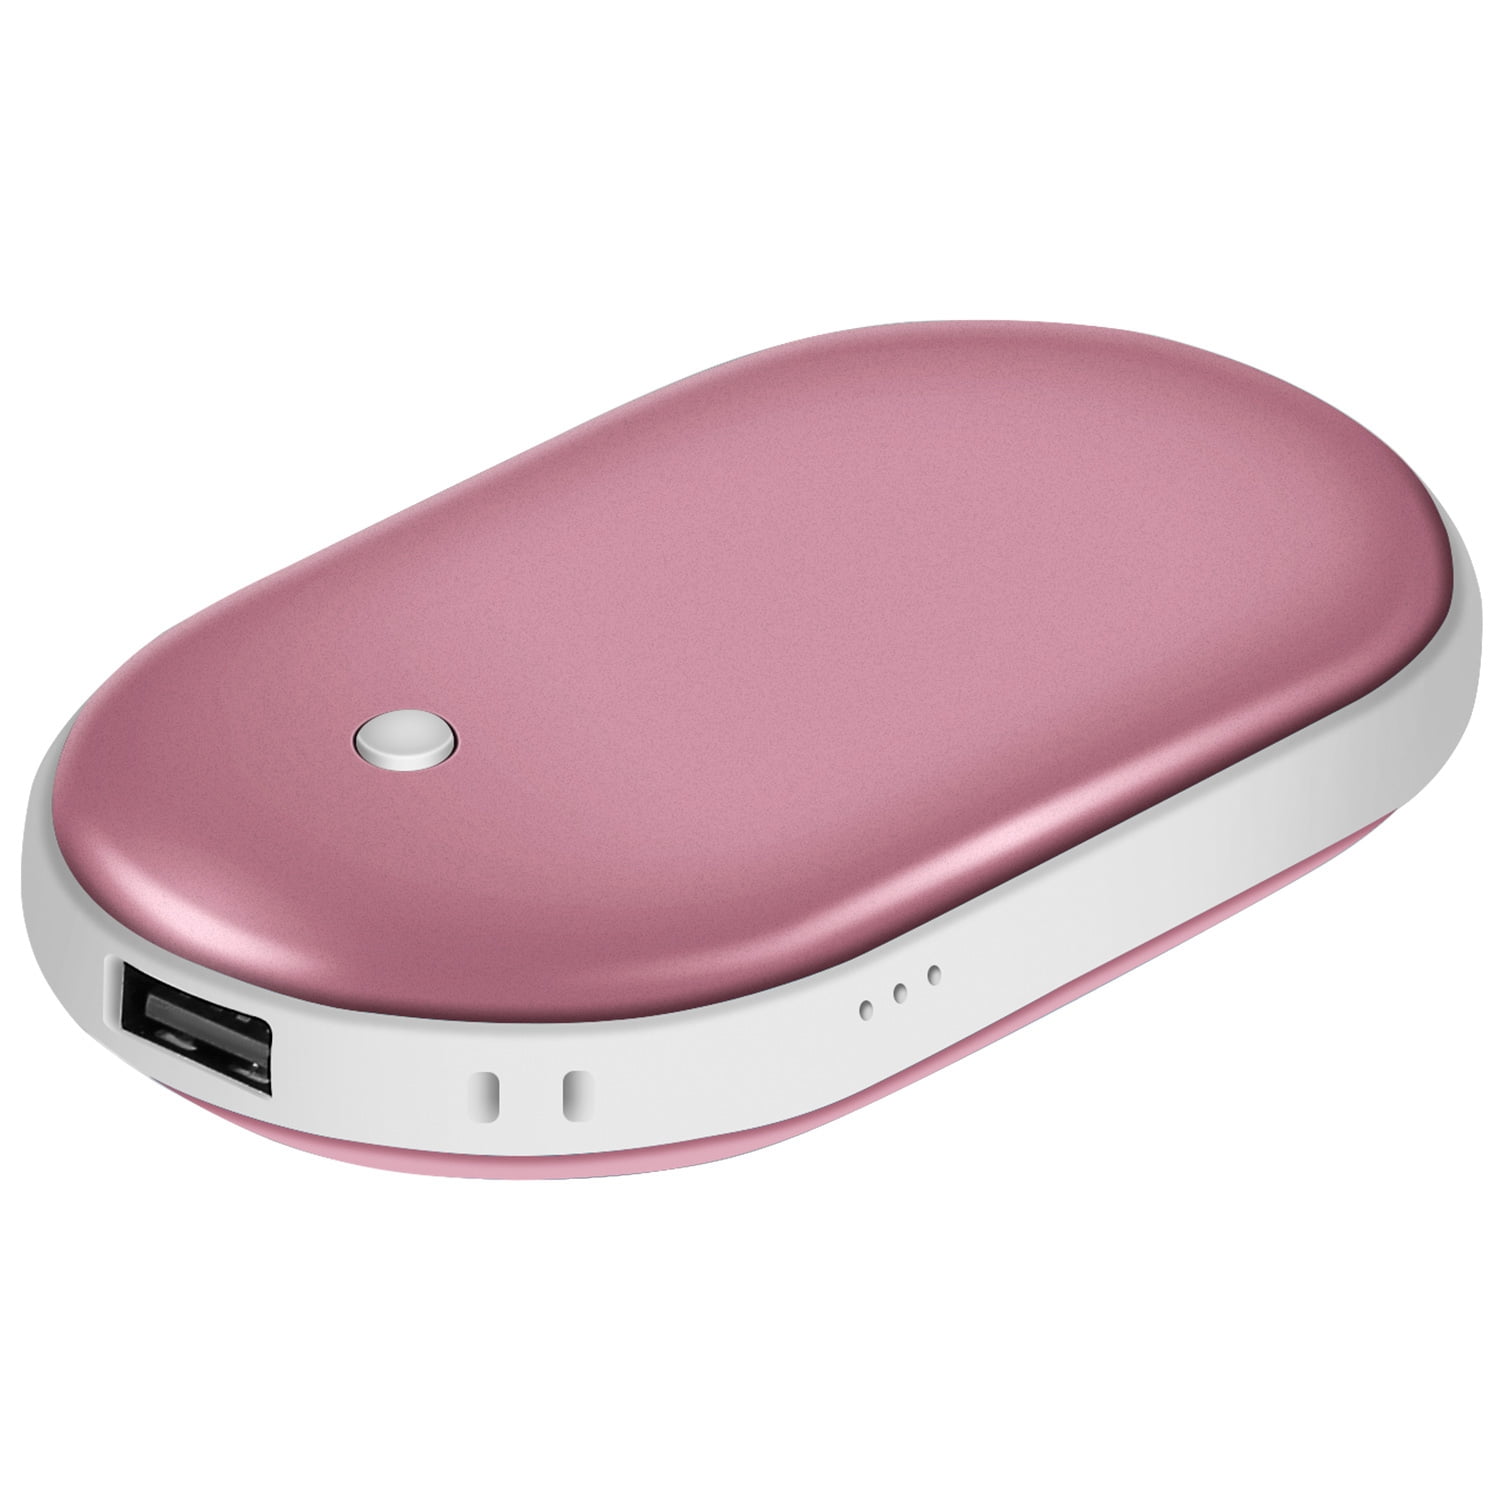 Pocket Hand Warmer Heater 5200mAh USB Charger Electric Rechargeable Power Bank 